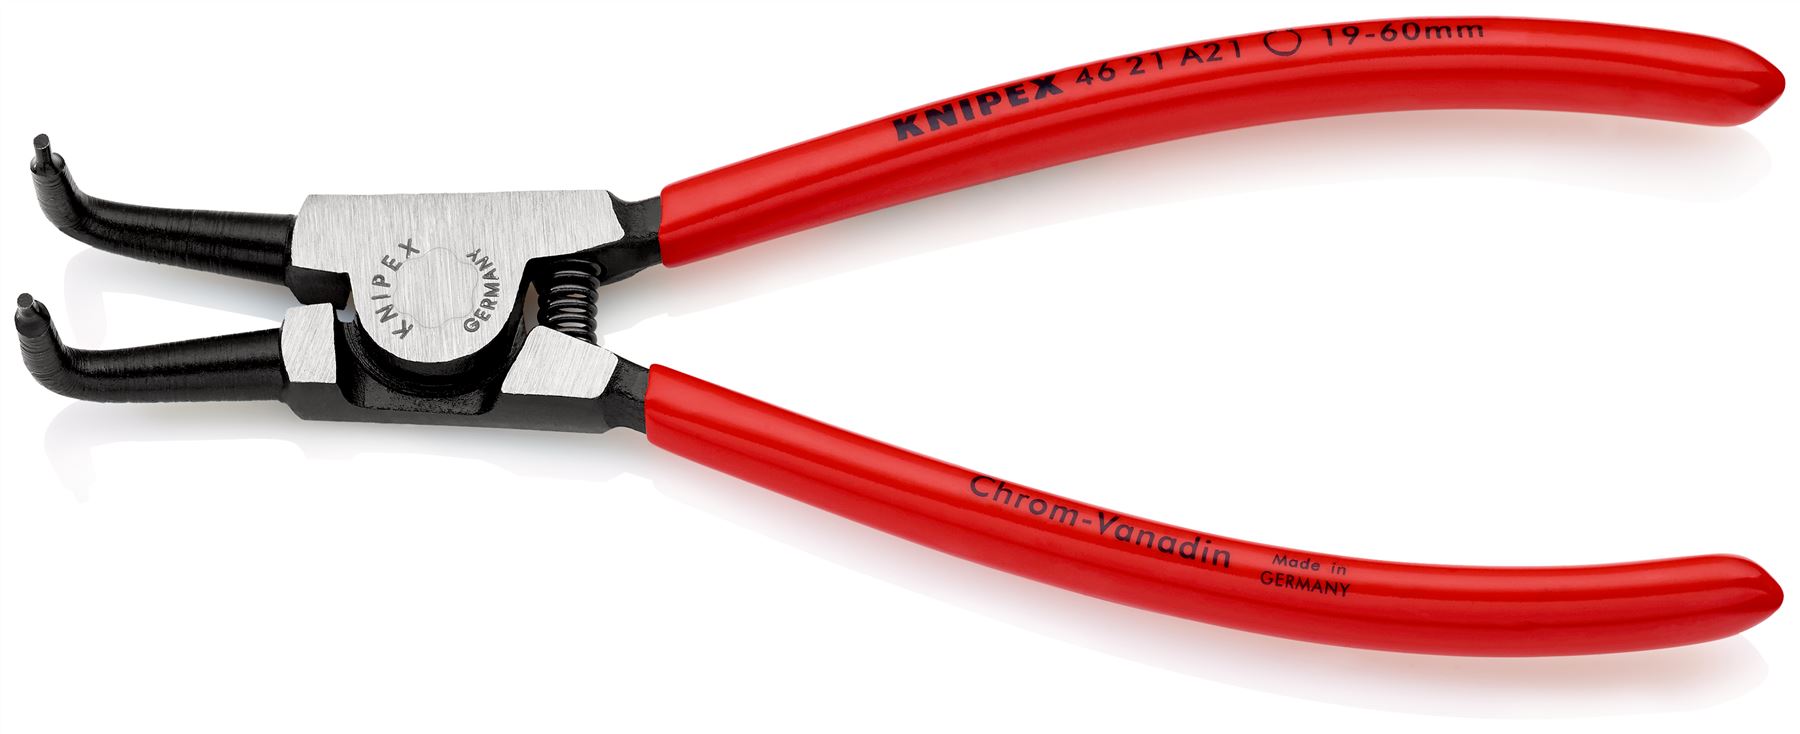 KNIPEX Circlip Pliers for External Circlips on Shafts 90° Angled 170mm 1.8mm Diameter Tips 46 21 A21 SB